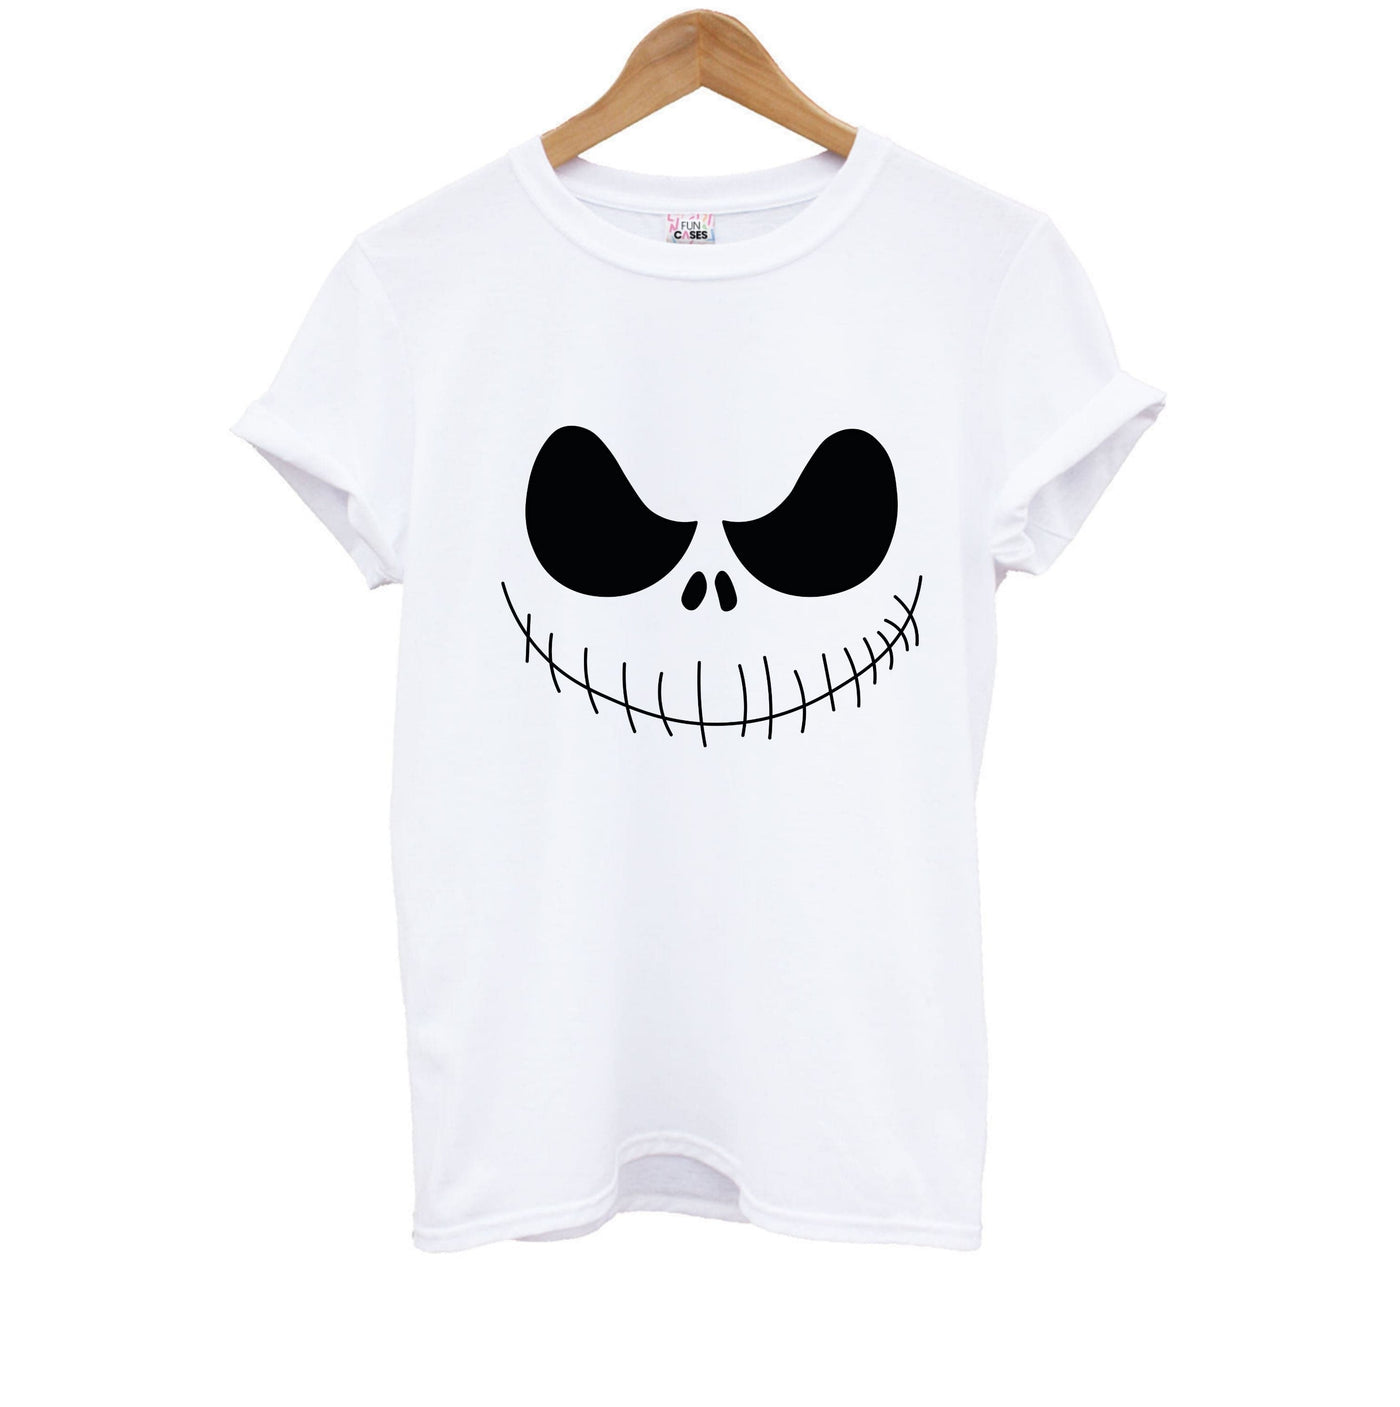 Jack Face - Nightmare Before Christmas Kids T-Shirt